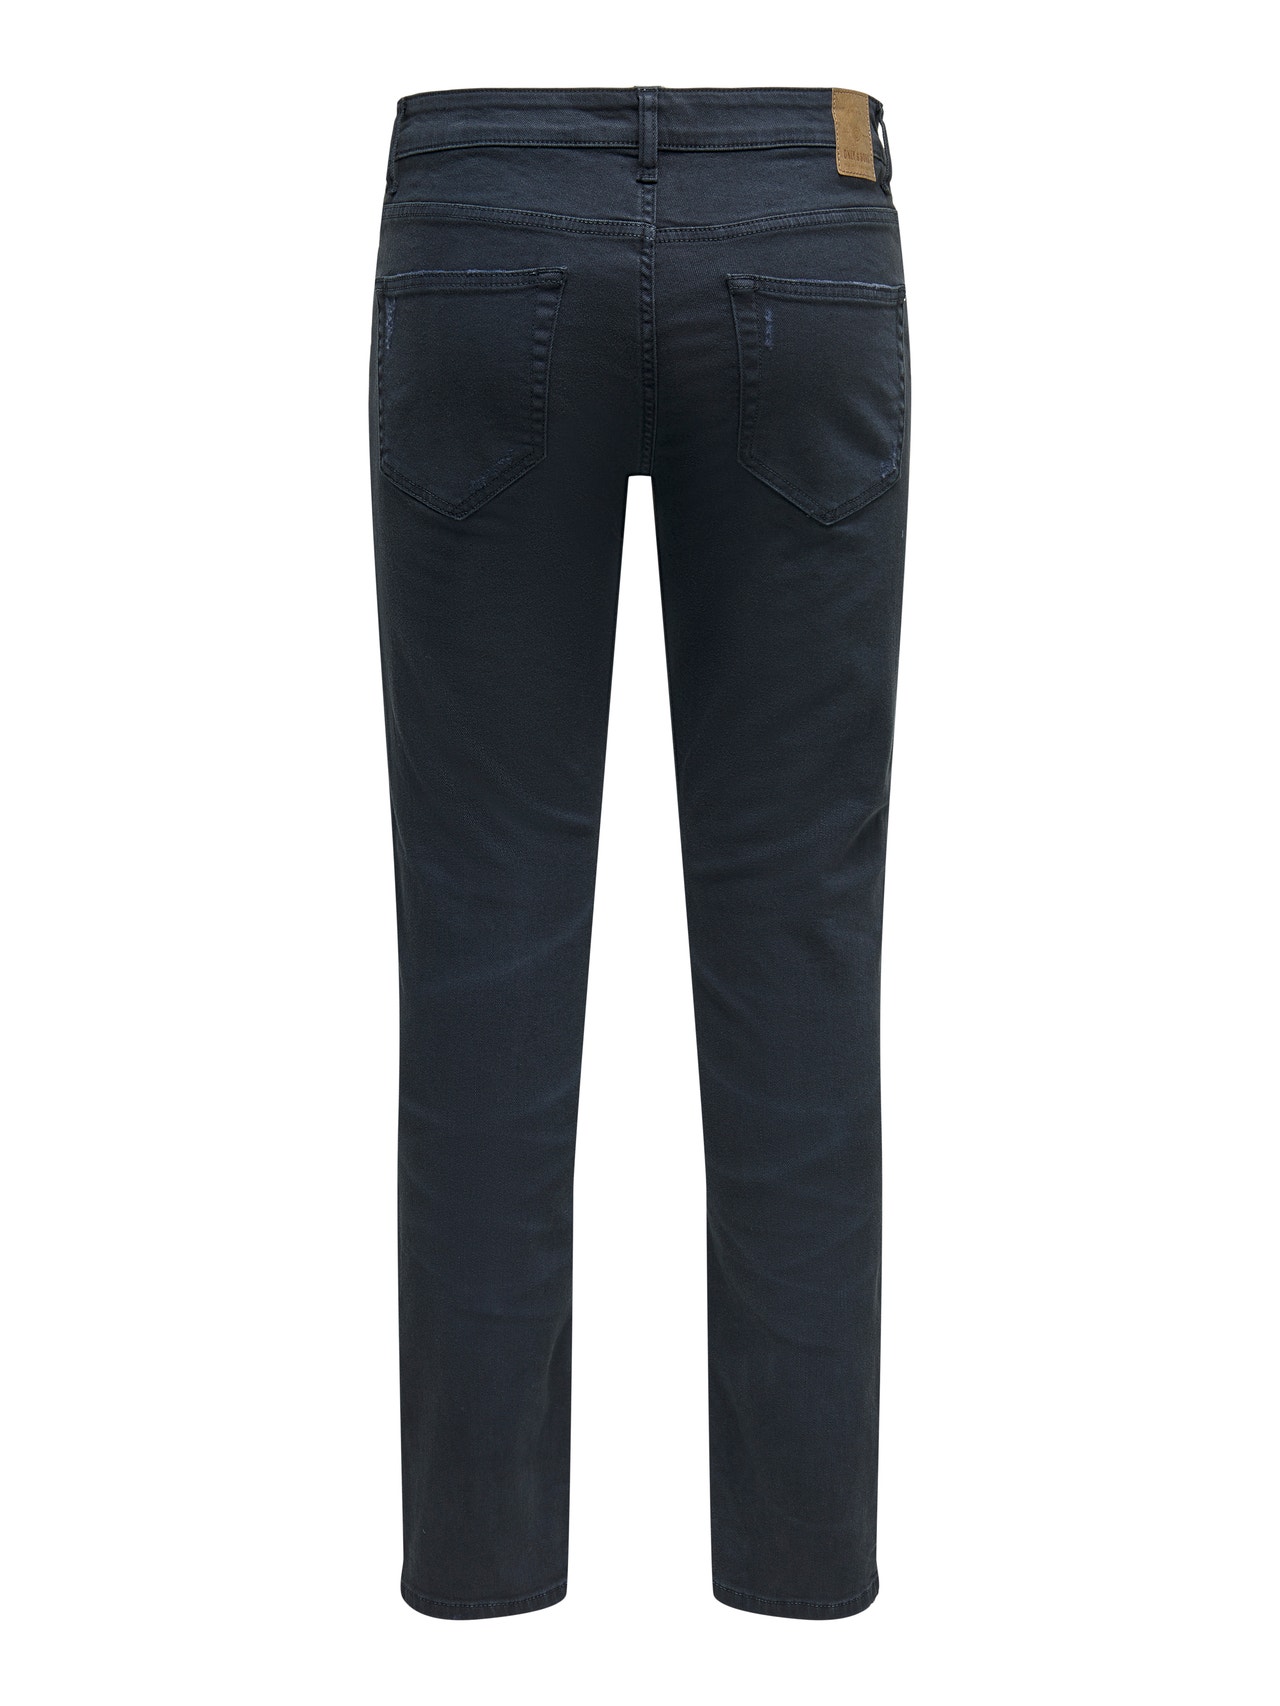 ONLY & SONS Slim Fit Mid waist Trousers -Dark Navy - 22021849